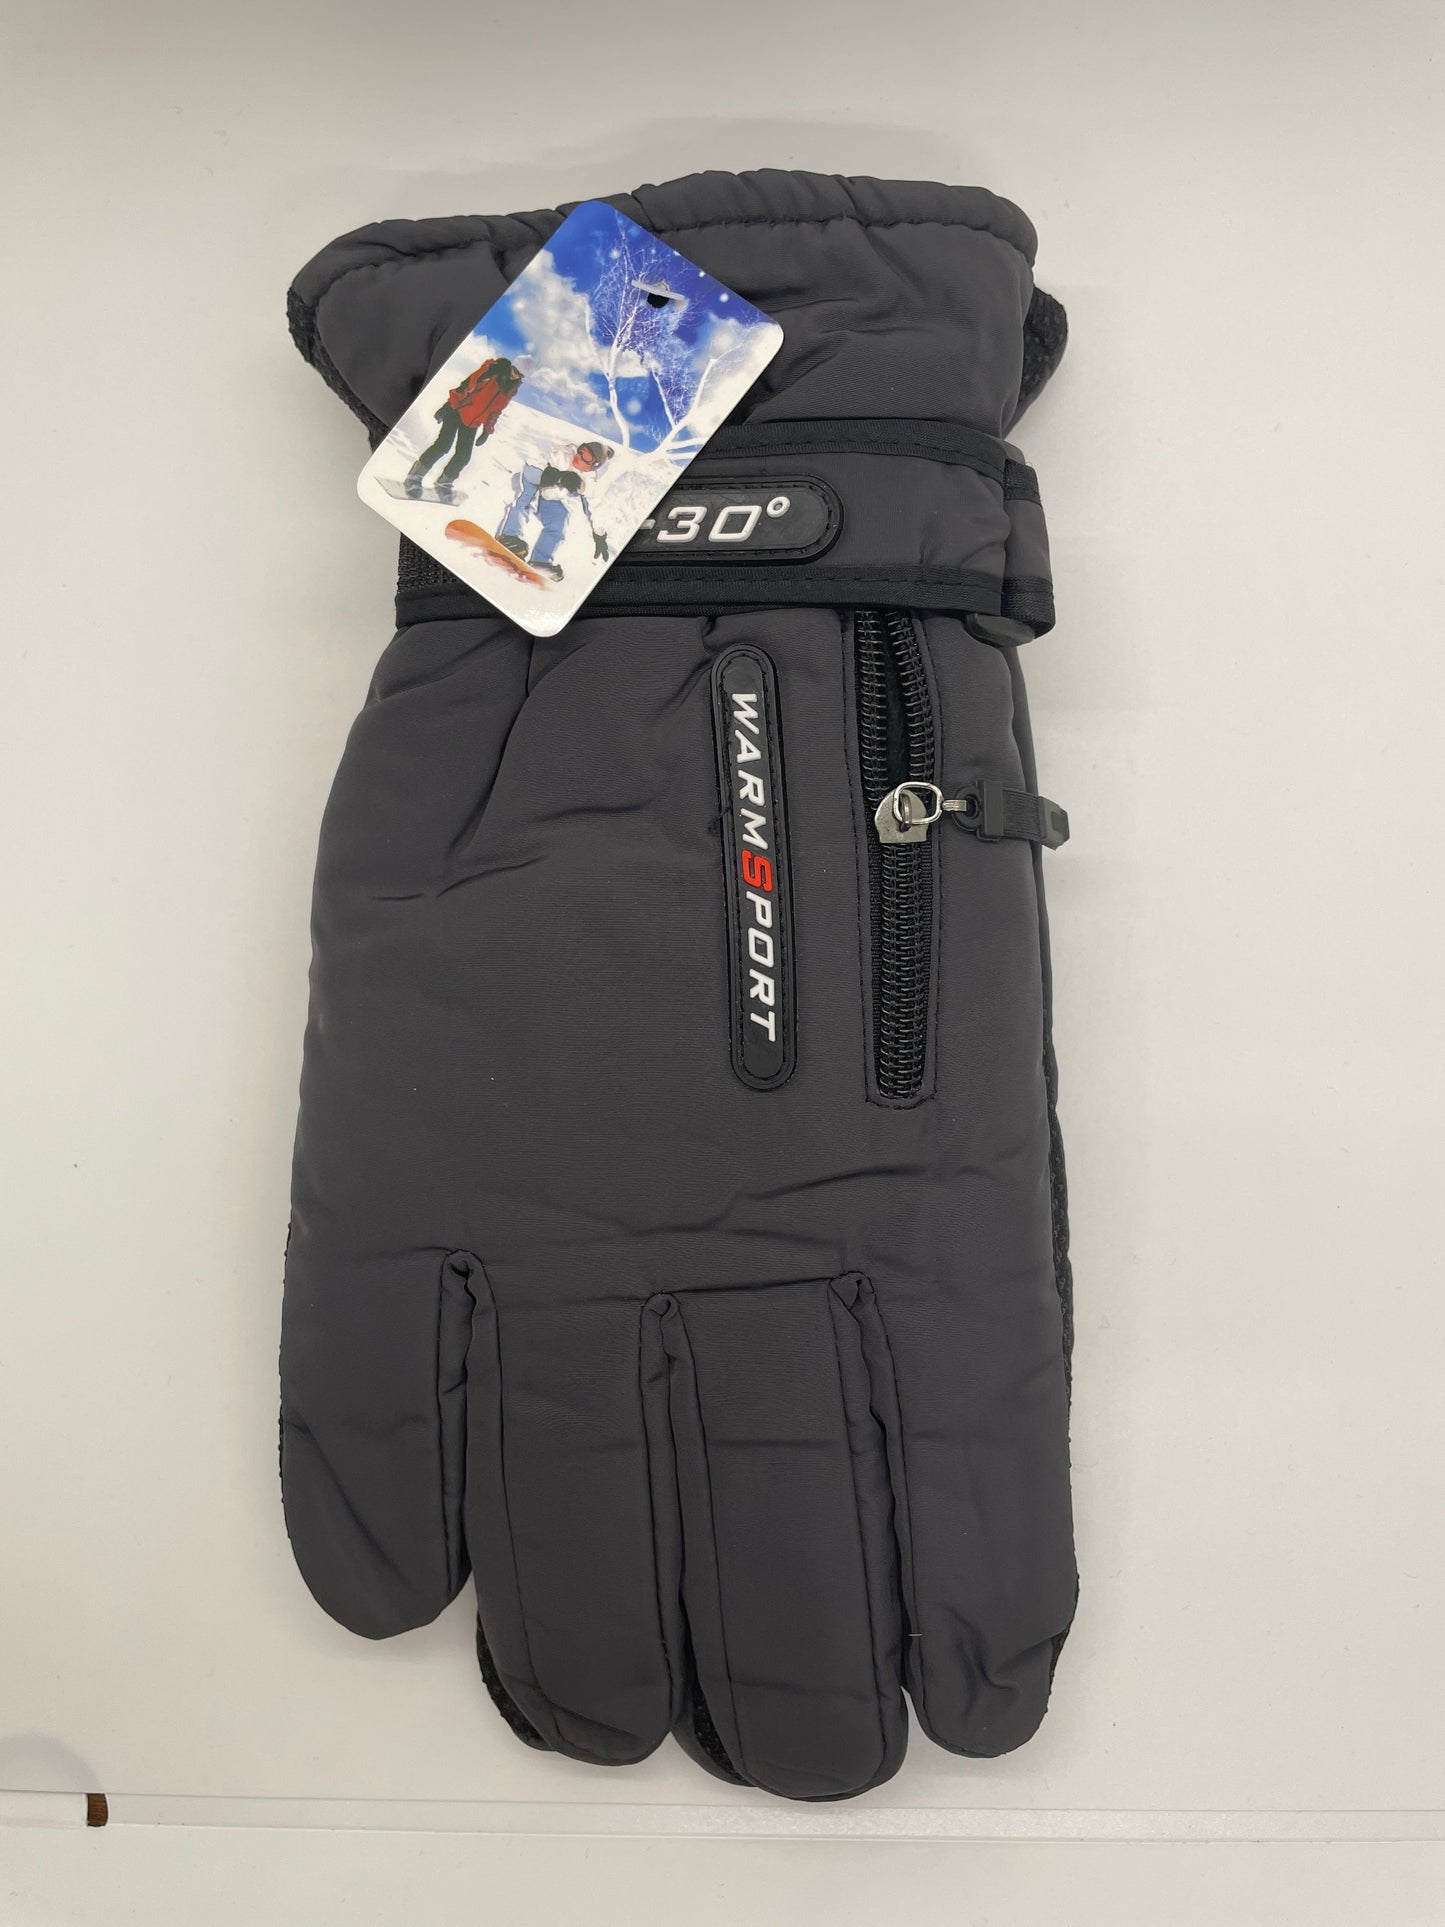 "Gray winter insulated gloves with a ribbed knit texture and a moisture-wicking design"